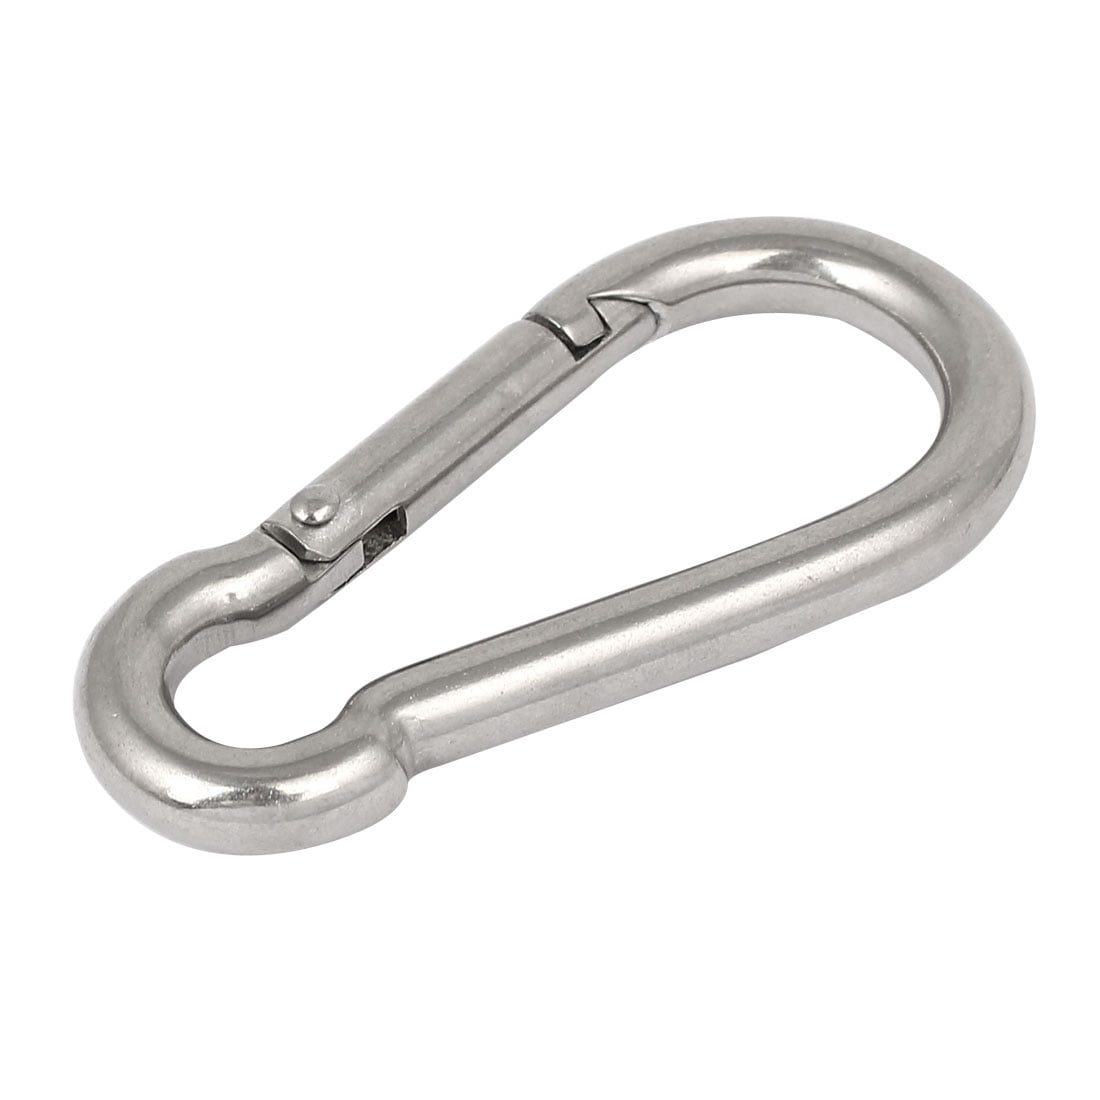 Details about   M4-M12 Stainless Steel Spring Hook Outdoor-Climbing Safety Buckle Snap Carabiner 